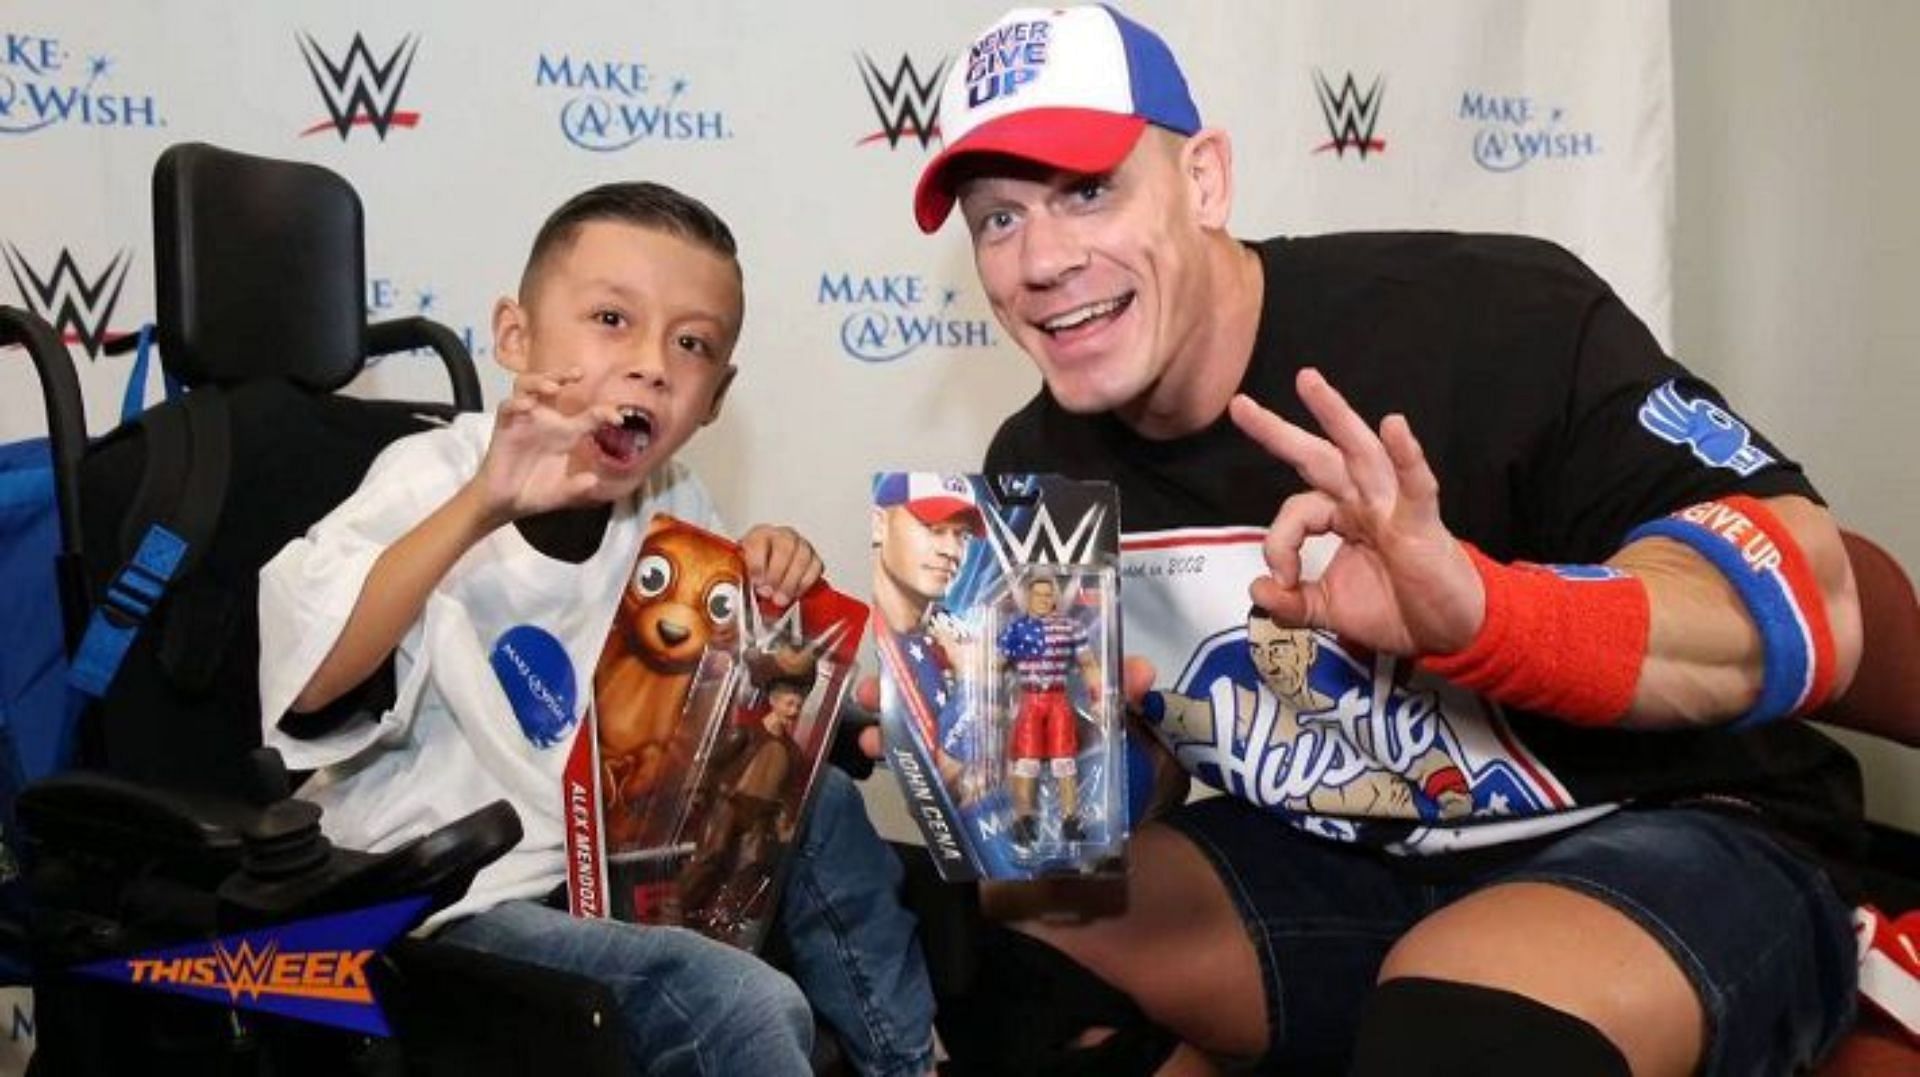 John Cena has granted over 650 wishes!